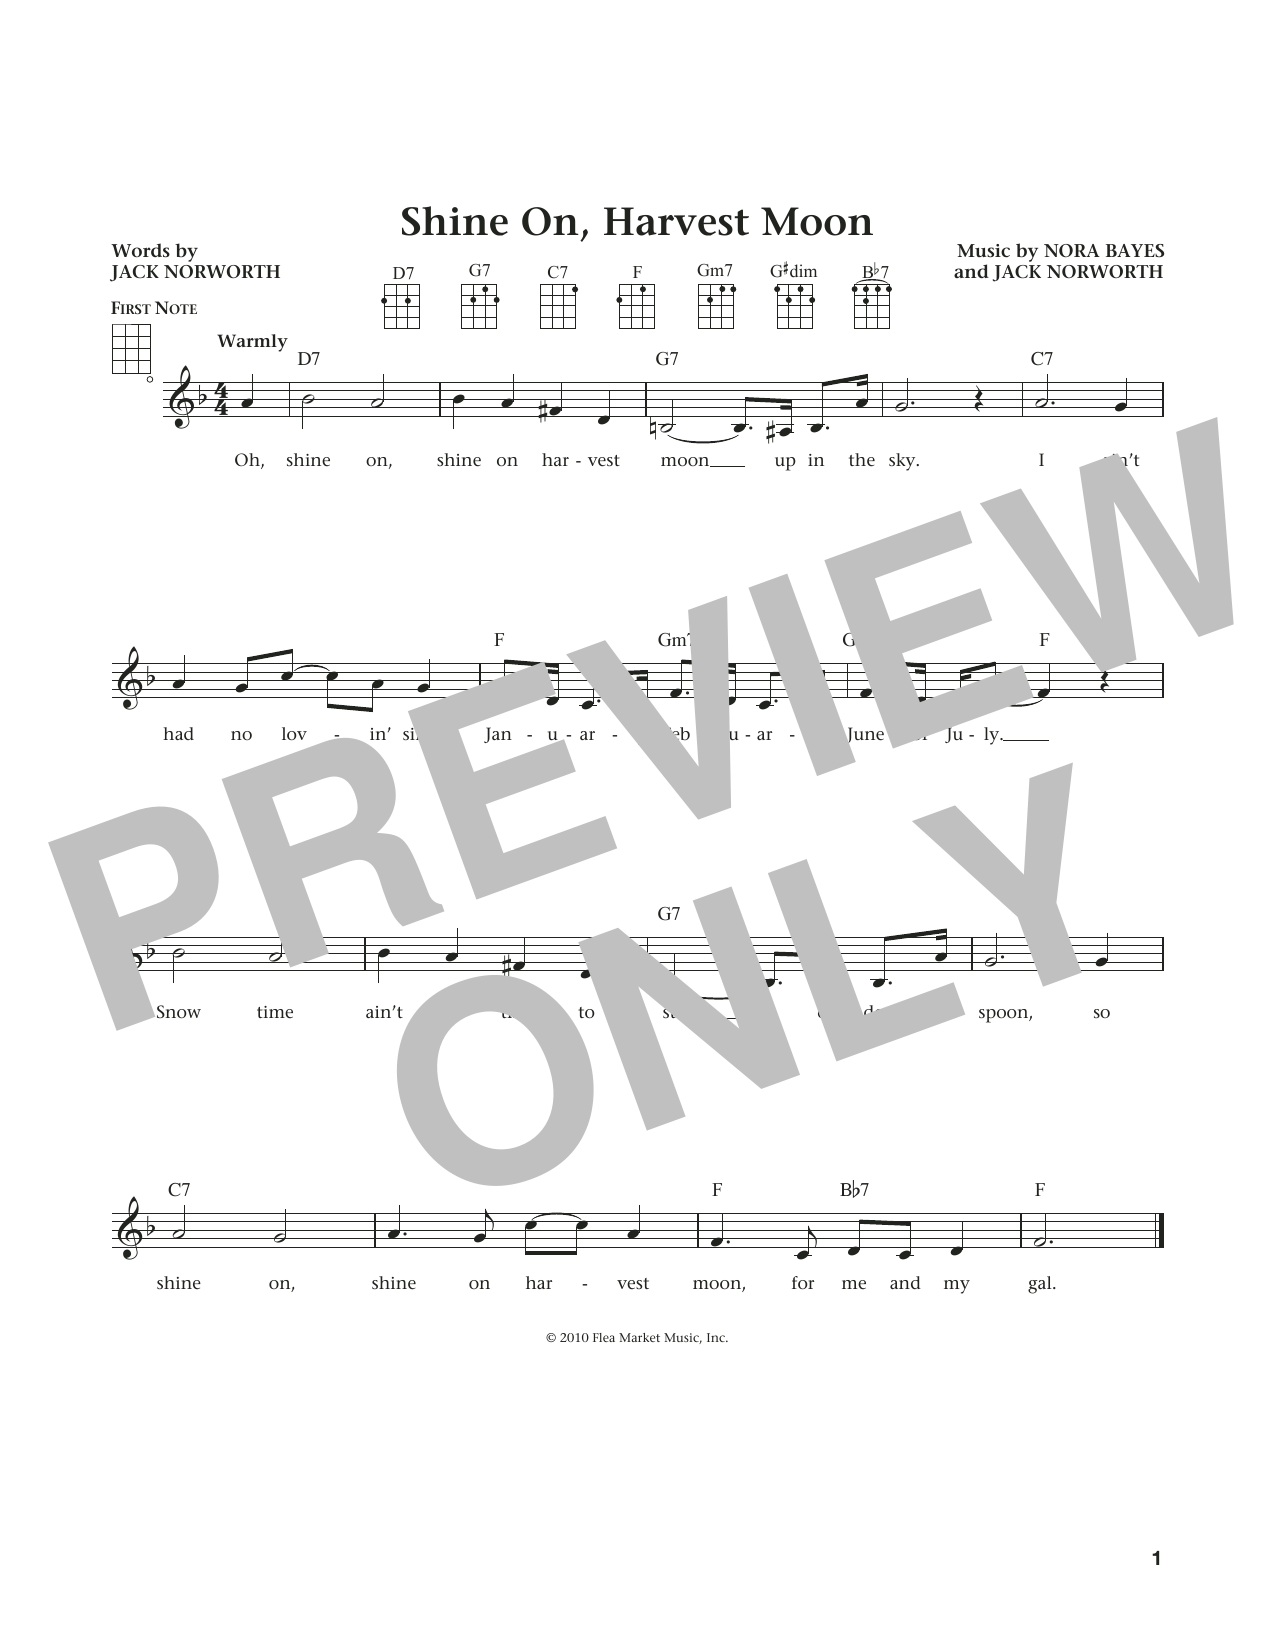 Download Jack Norworth Shine On, Harvest Moon (from The Daily Sheet Music